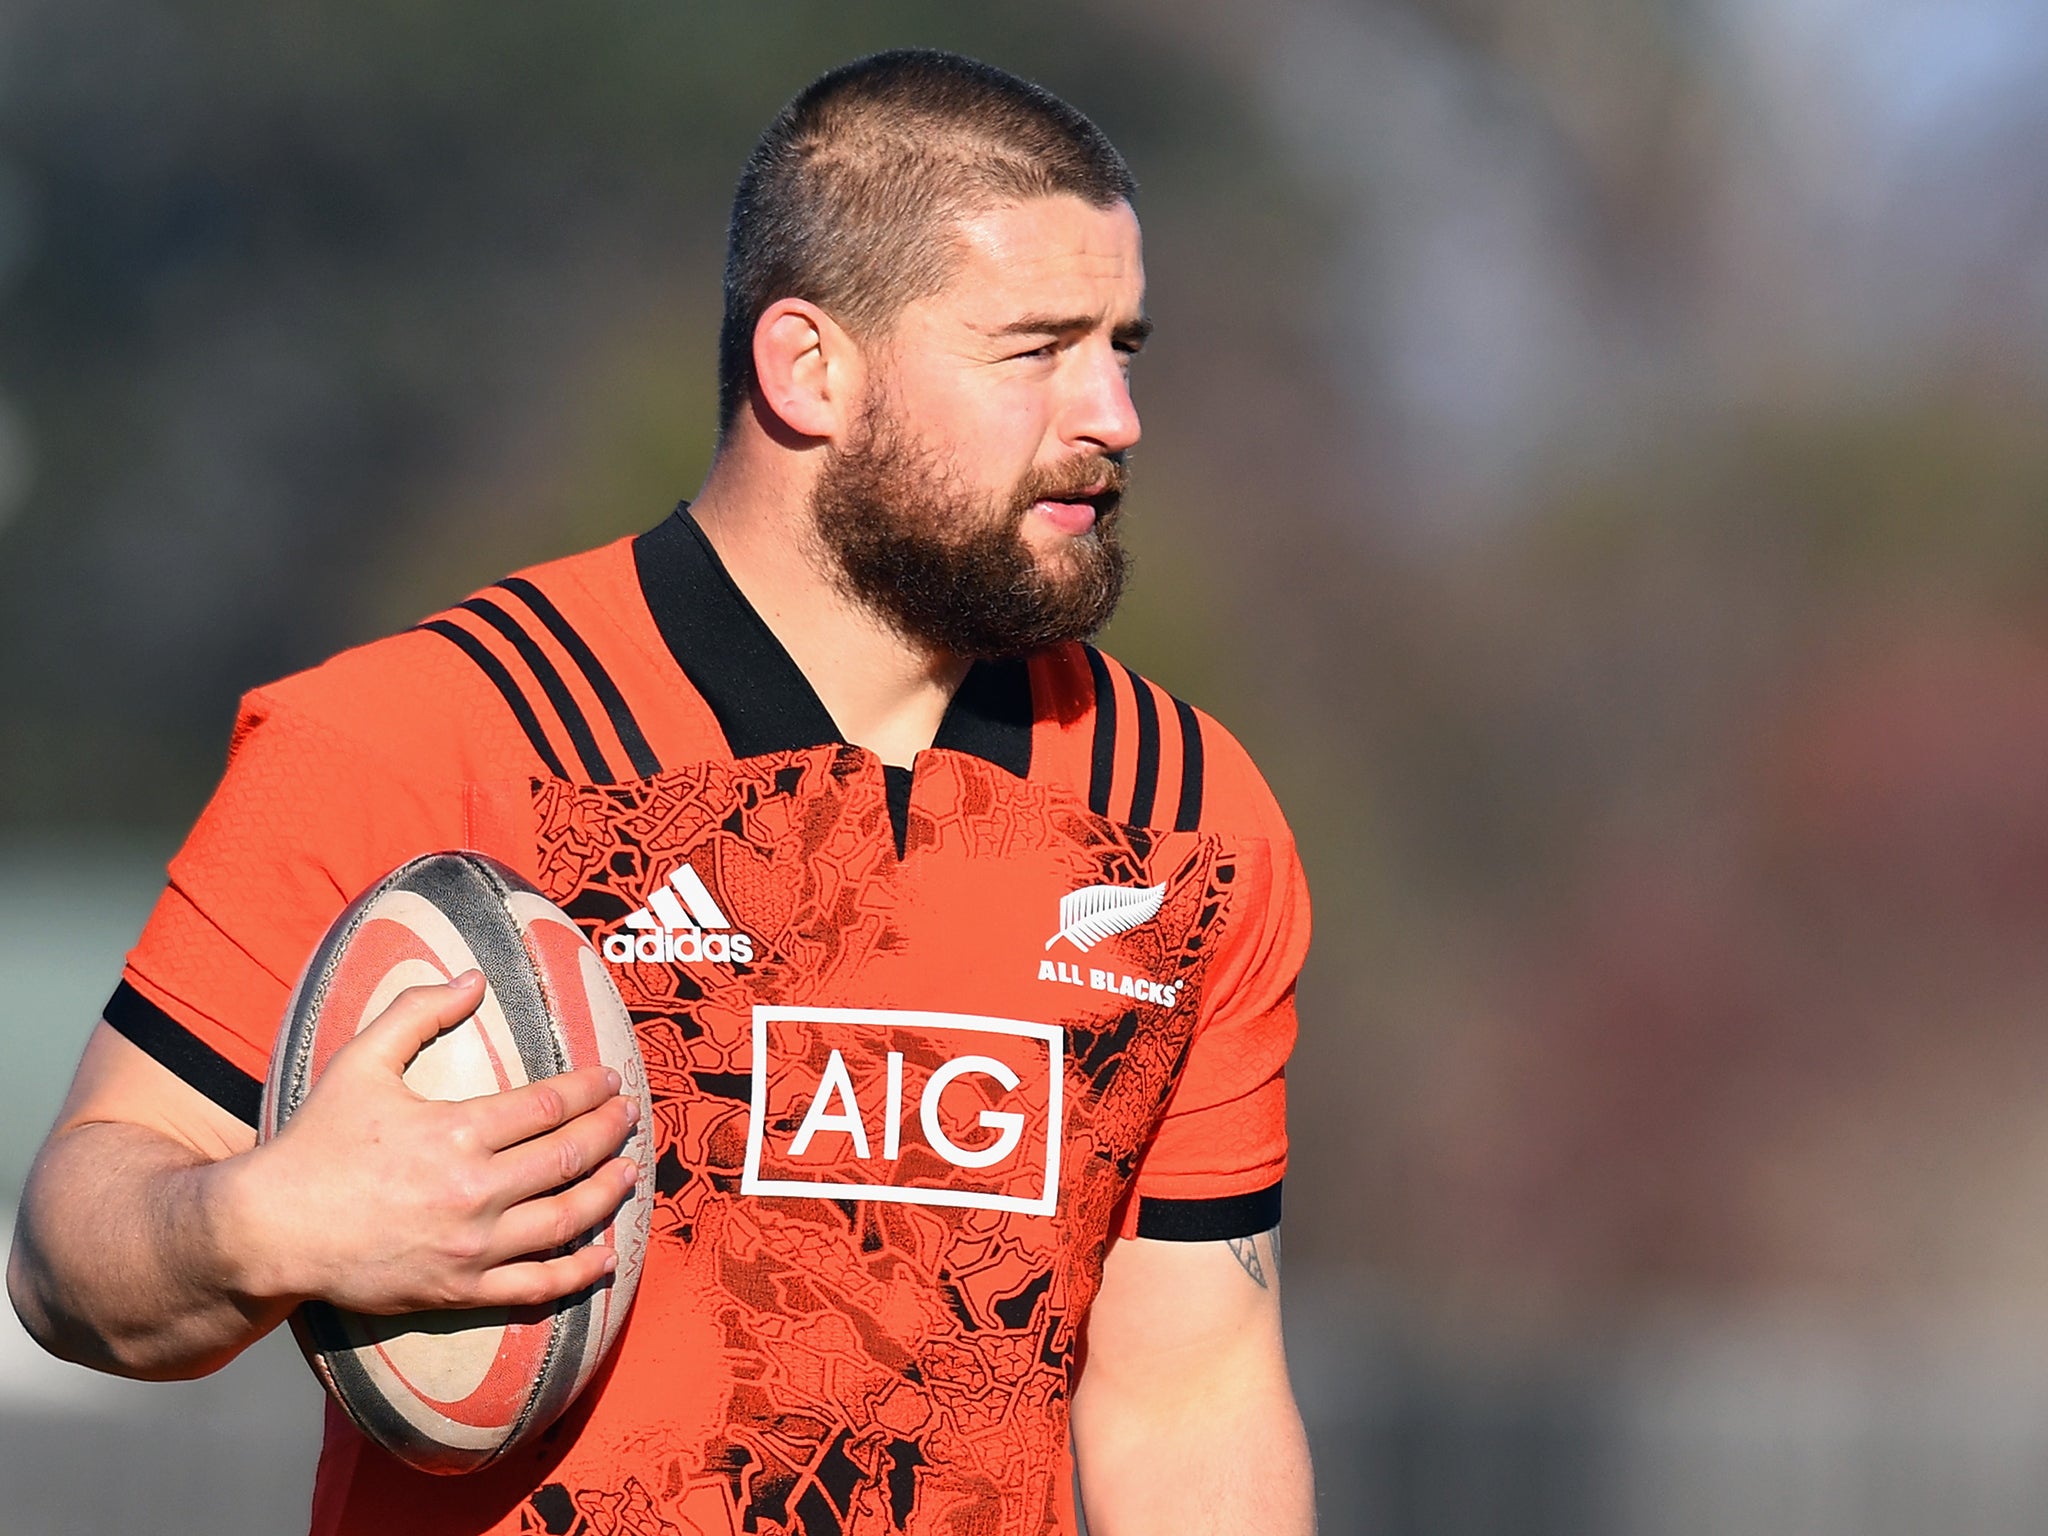 Dane Coles is in line to return for New Zealand this weekend